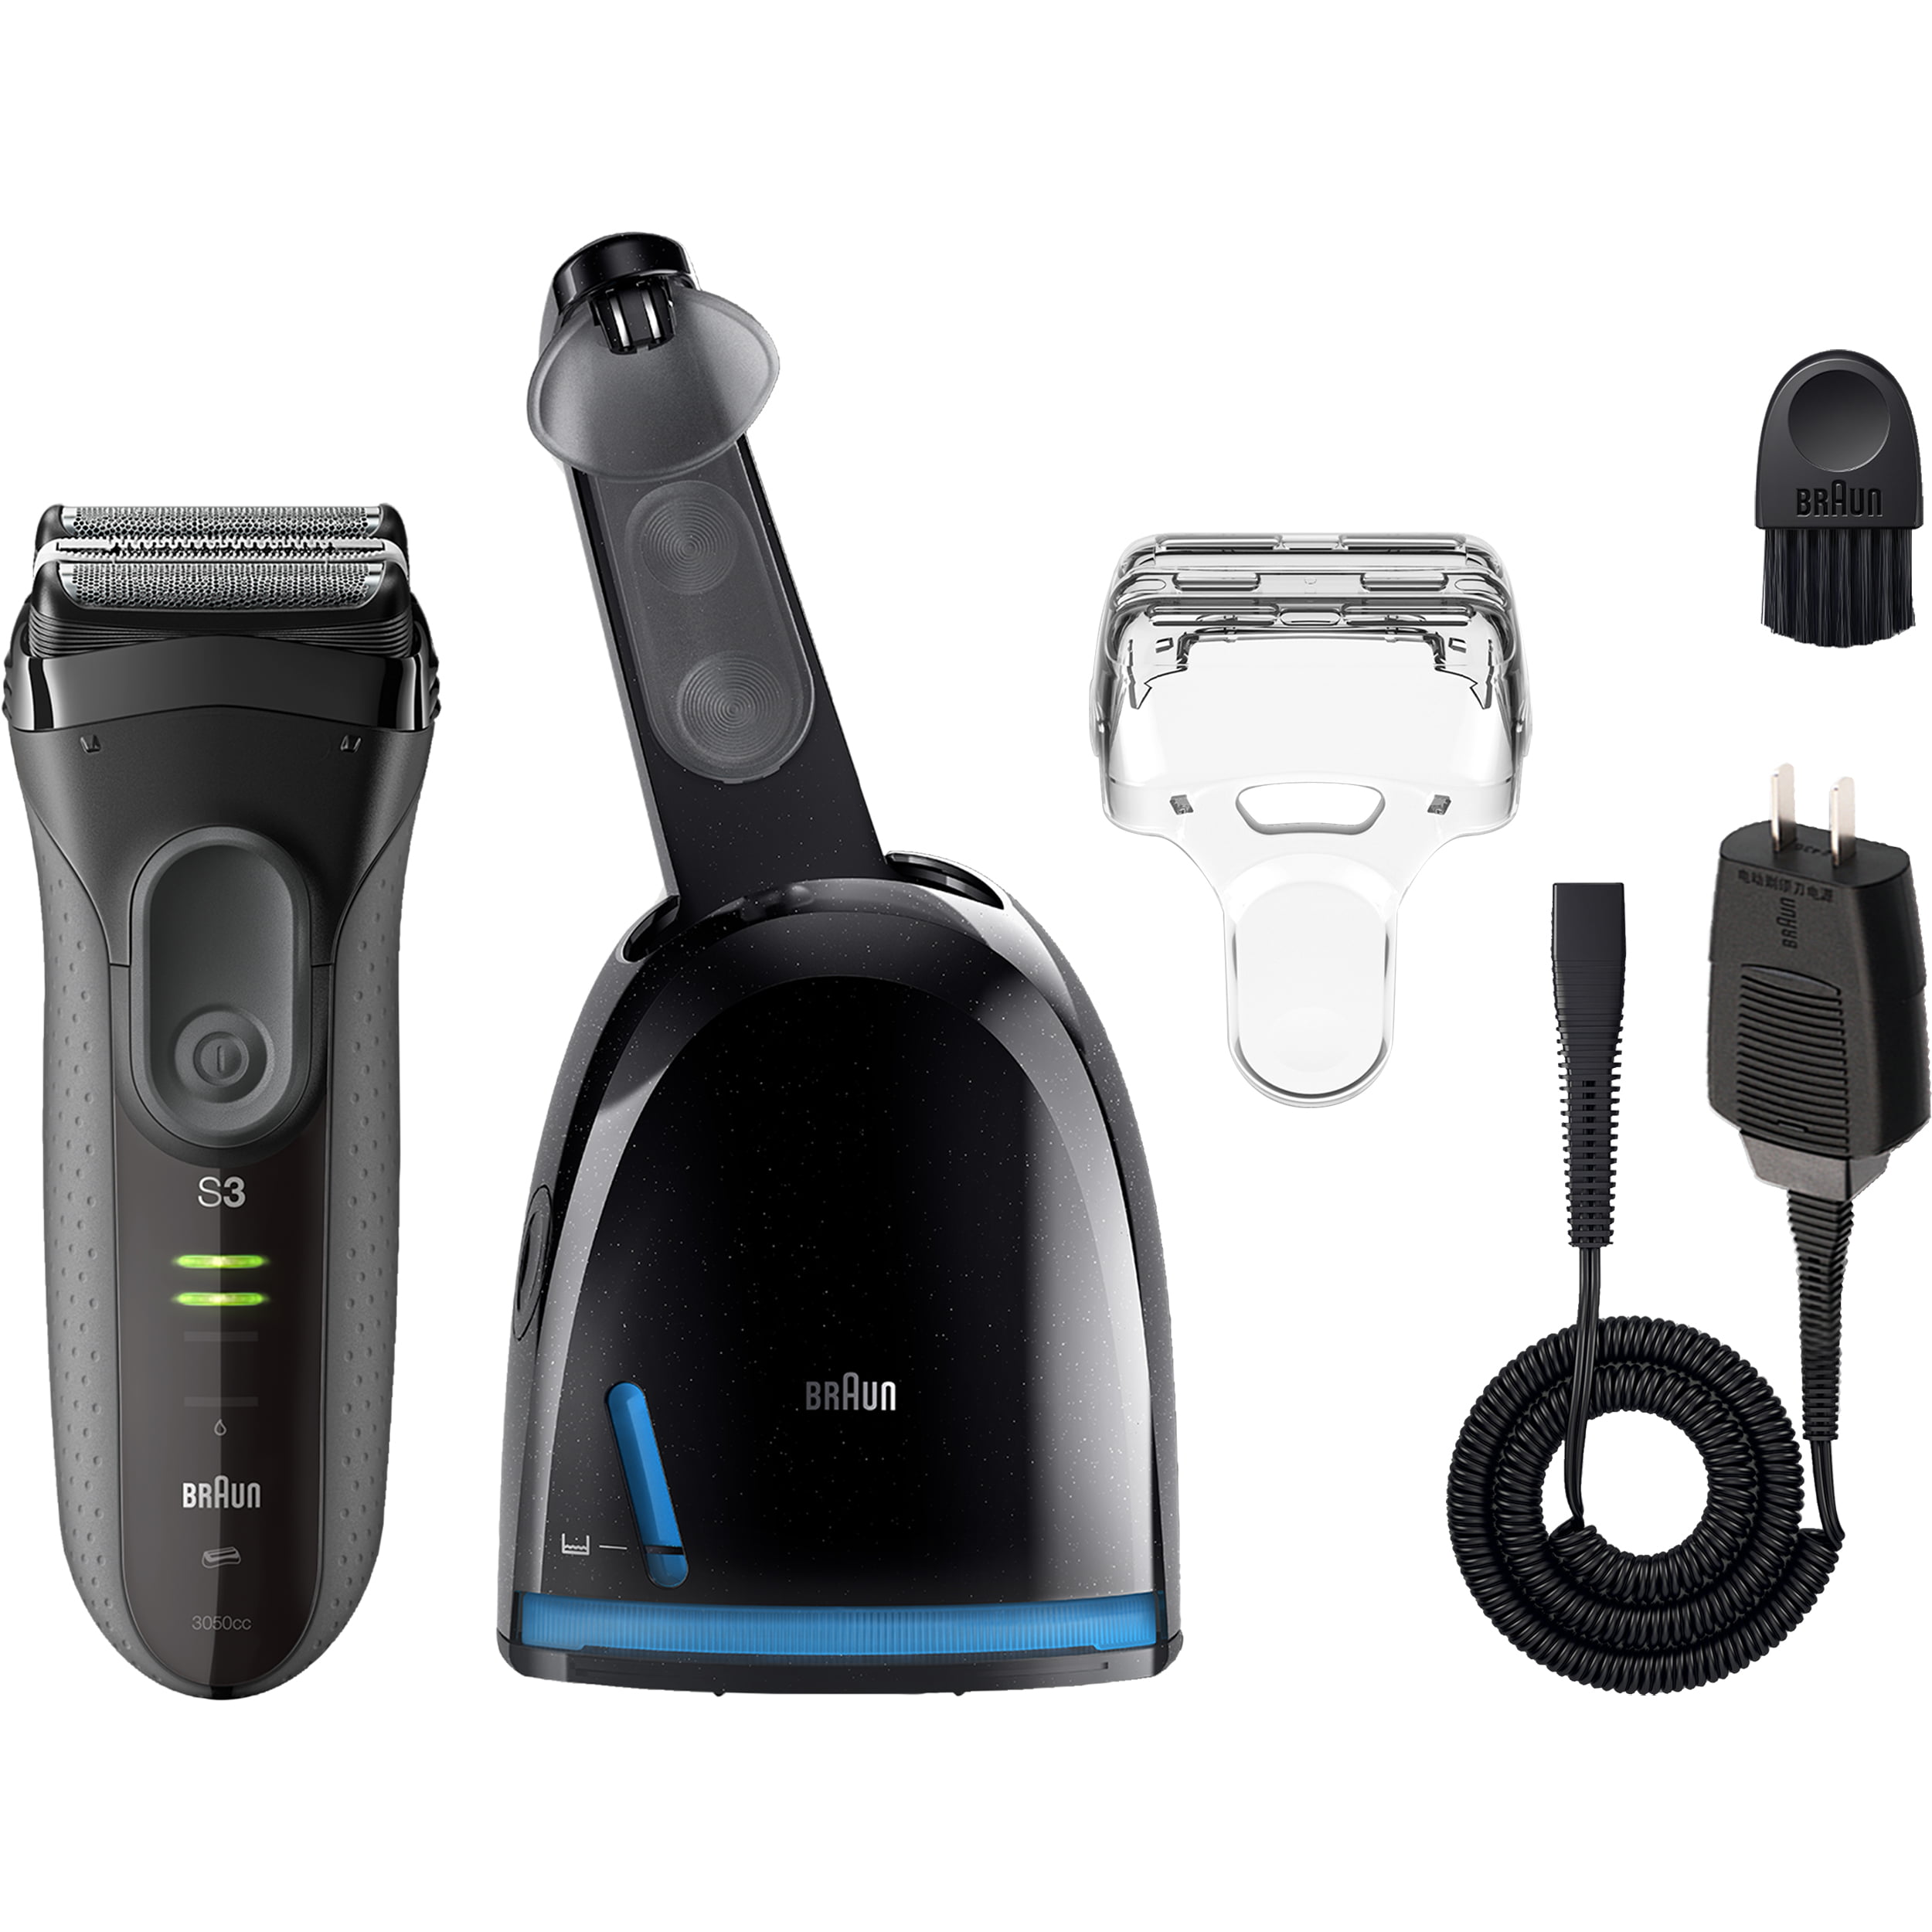 Braun Series 3 ProSkin 3050cc Wet Dry Electric Shaver, Clean Station